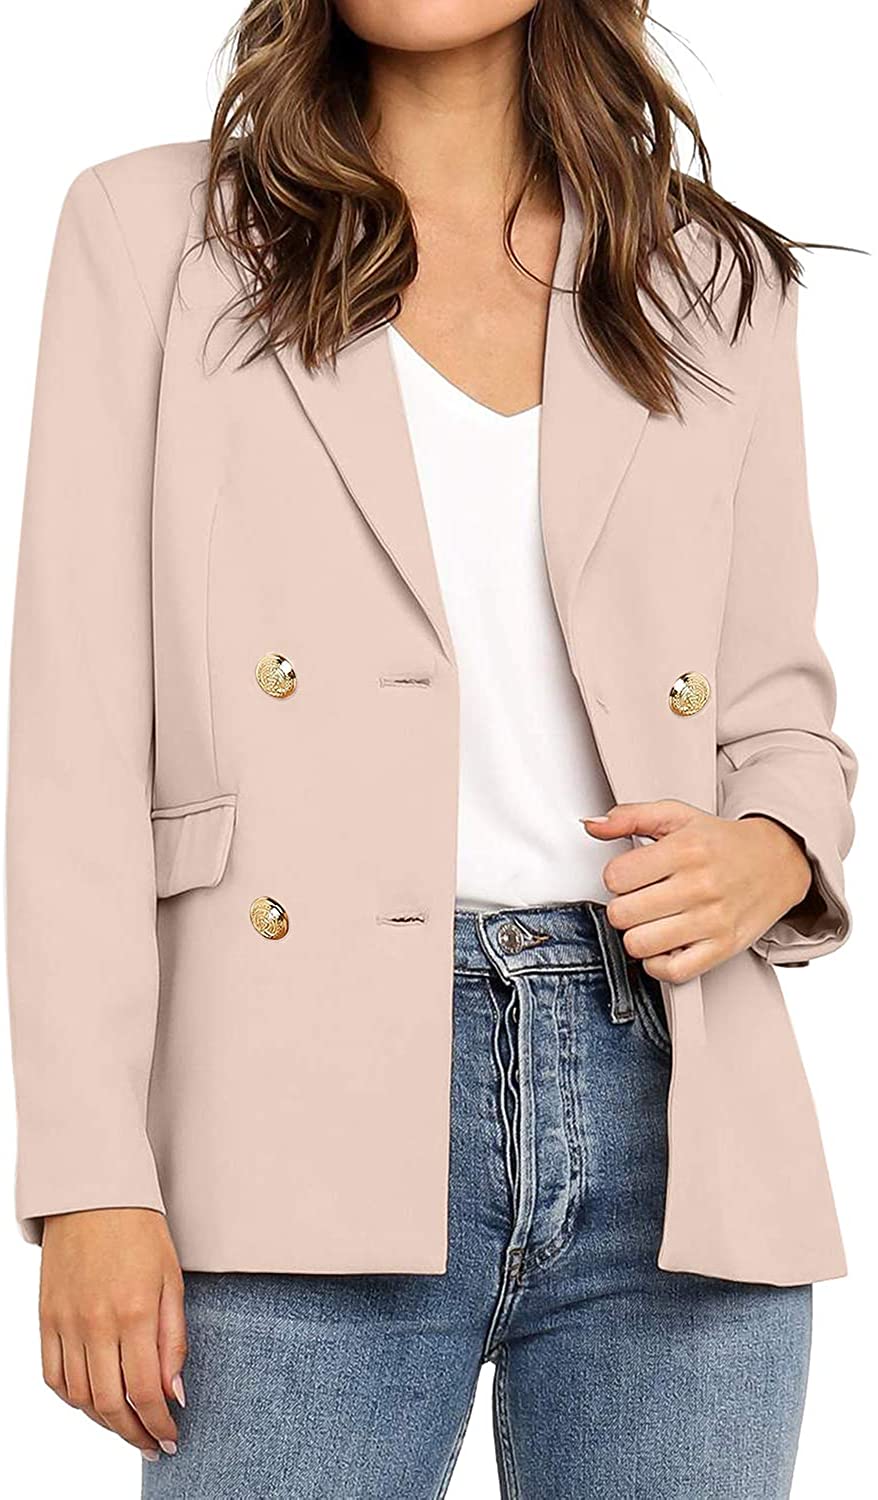 Utyful Women’s Casual Notched Lapel Double Breasted Button Pocket Work Office Blazer Jacket